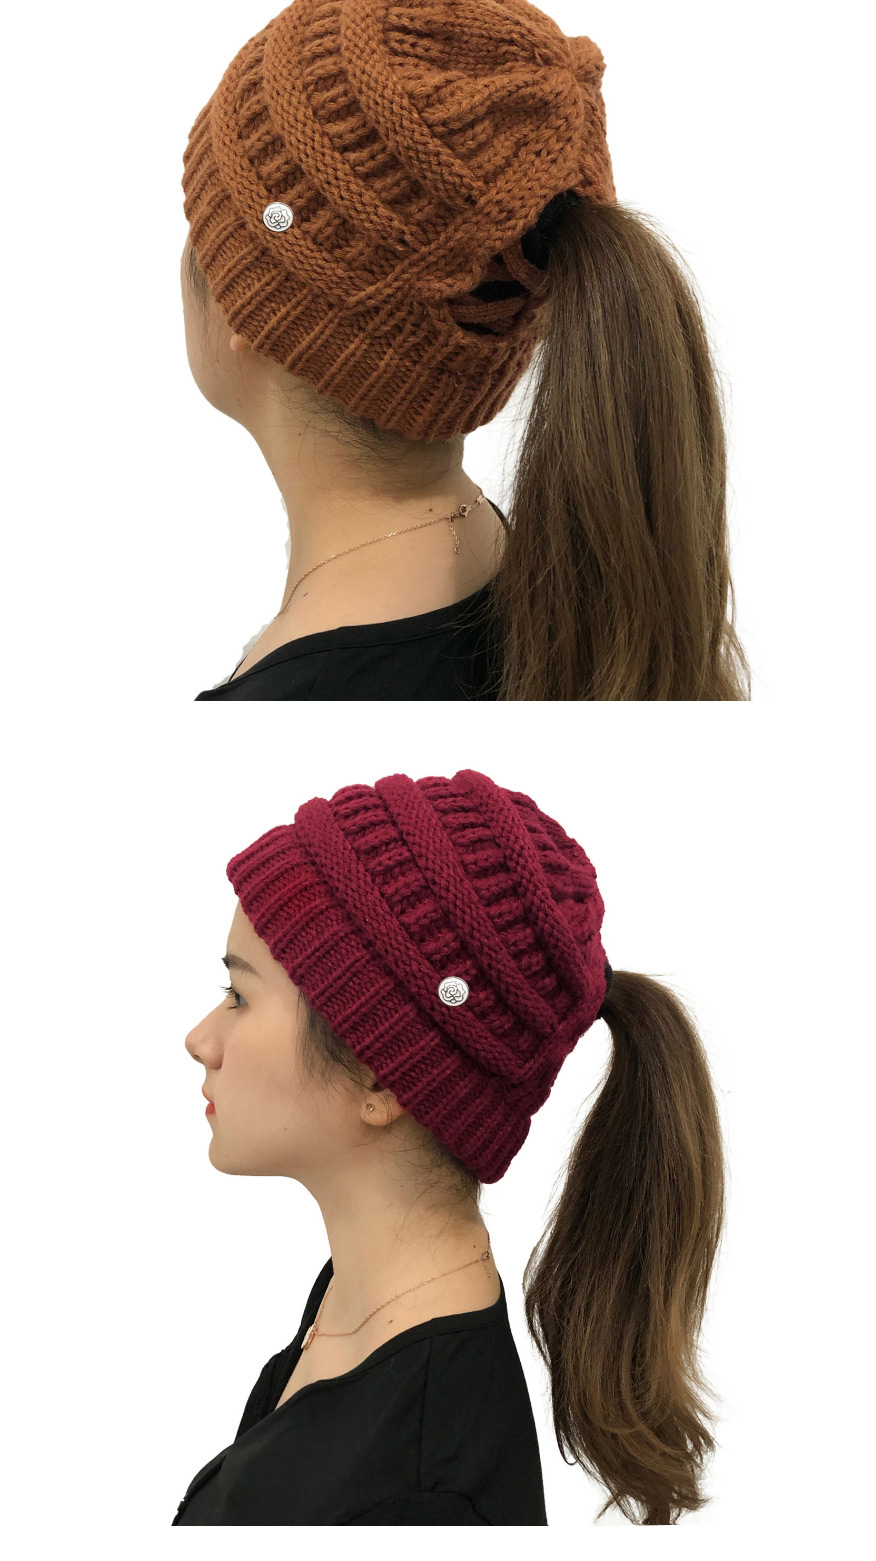 Fashion Black Button Detachable Cross-back Ponytail Knitted Hat,Knitting Wool Hats